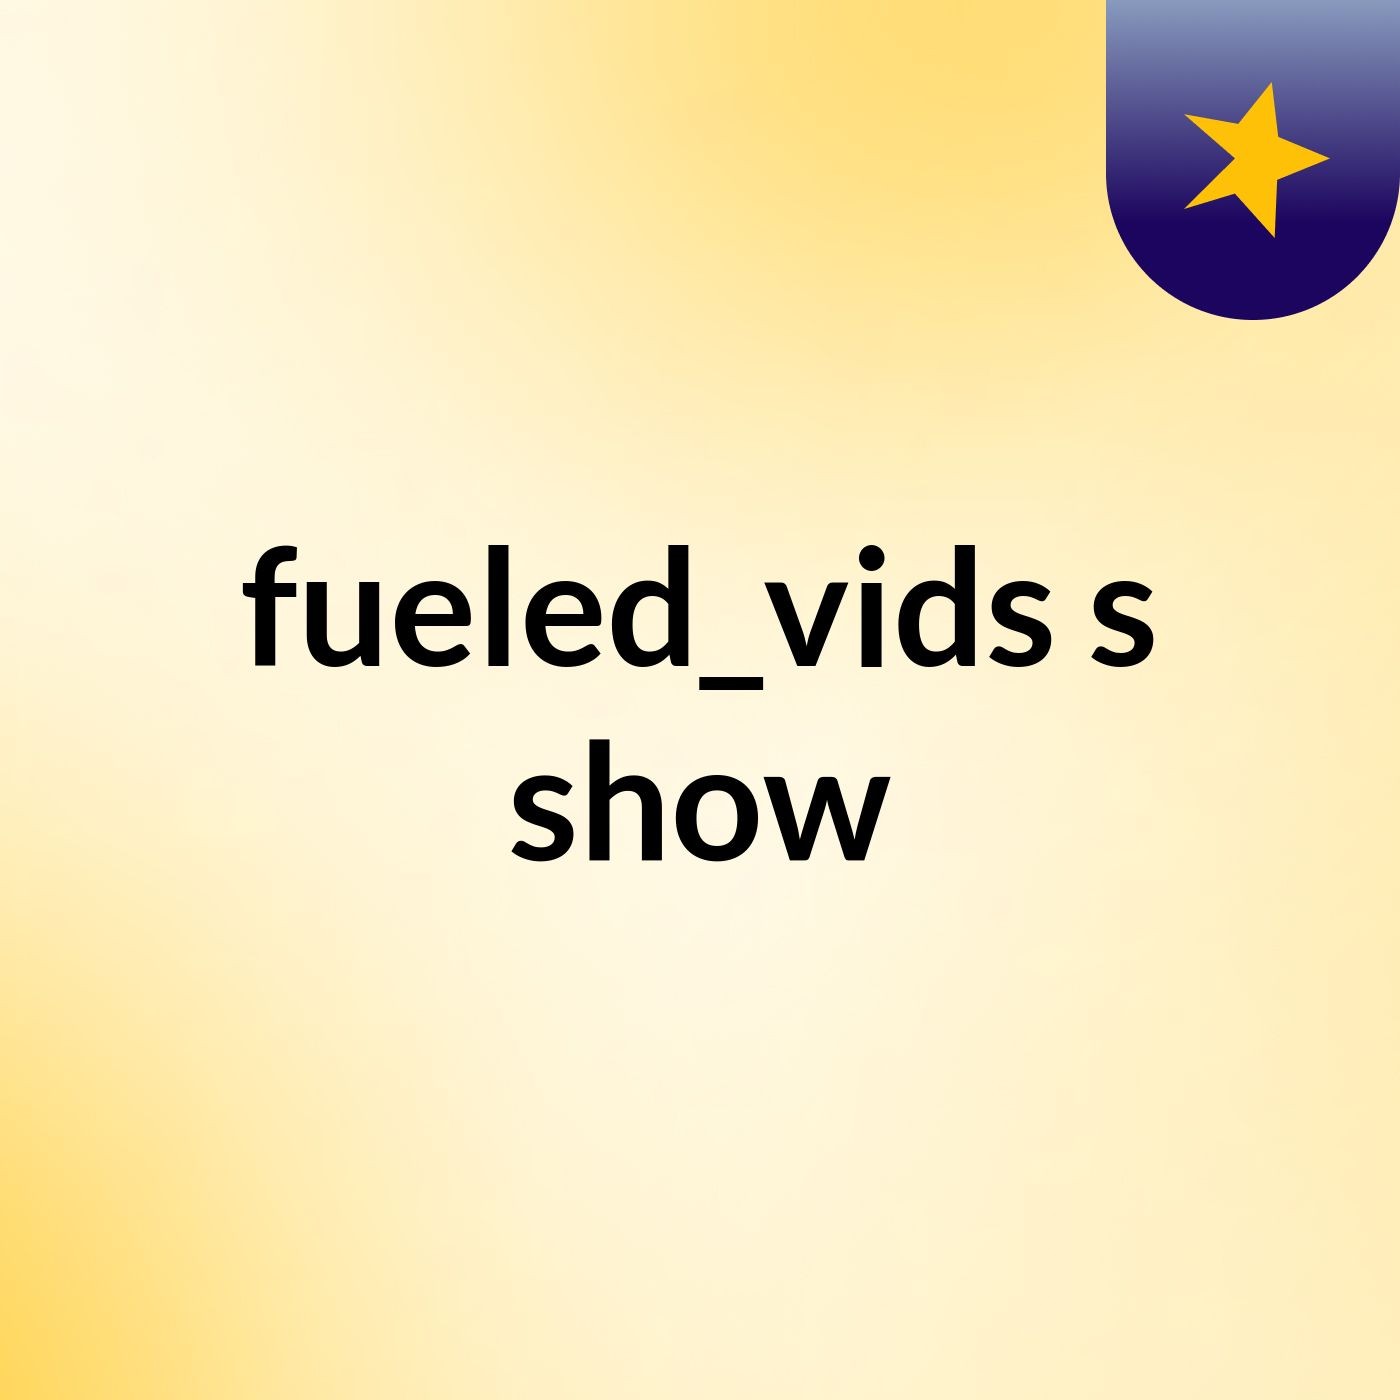 fueled_vids's show